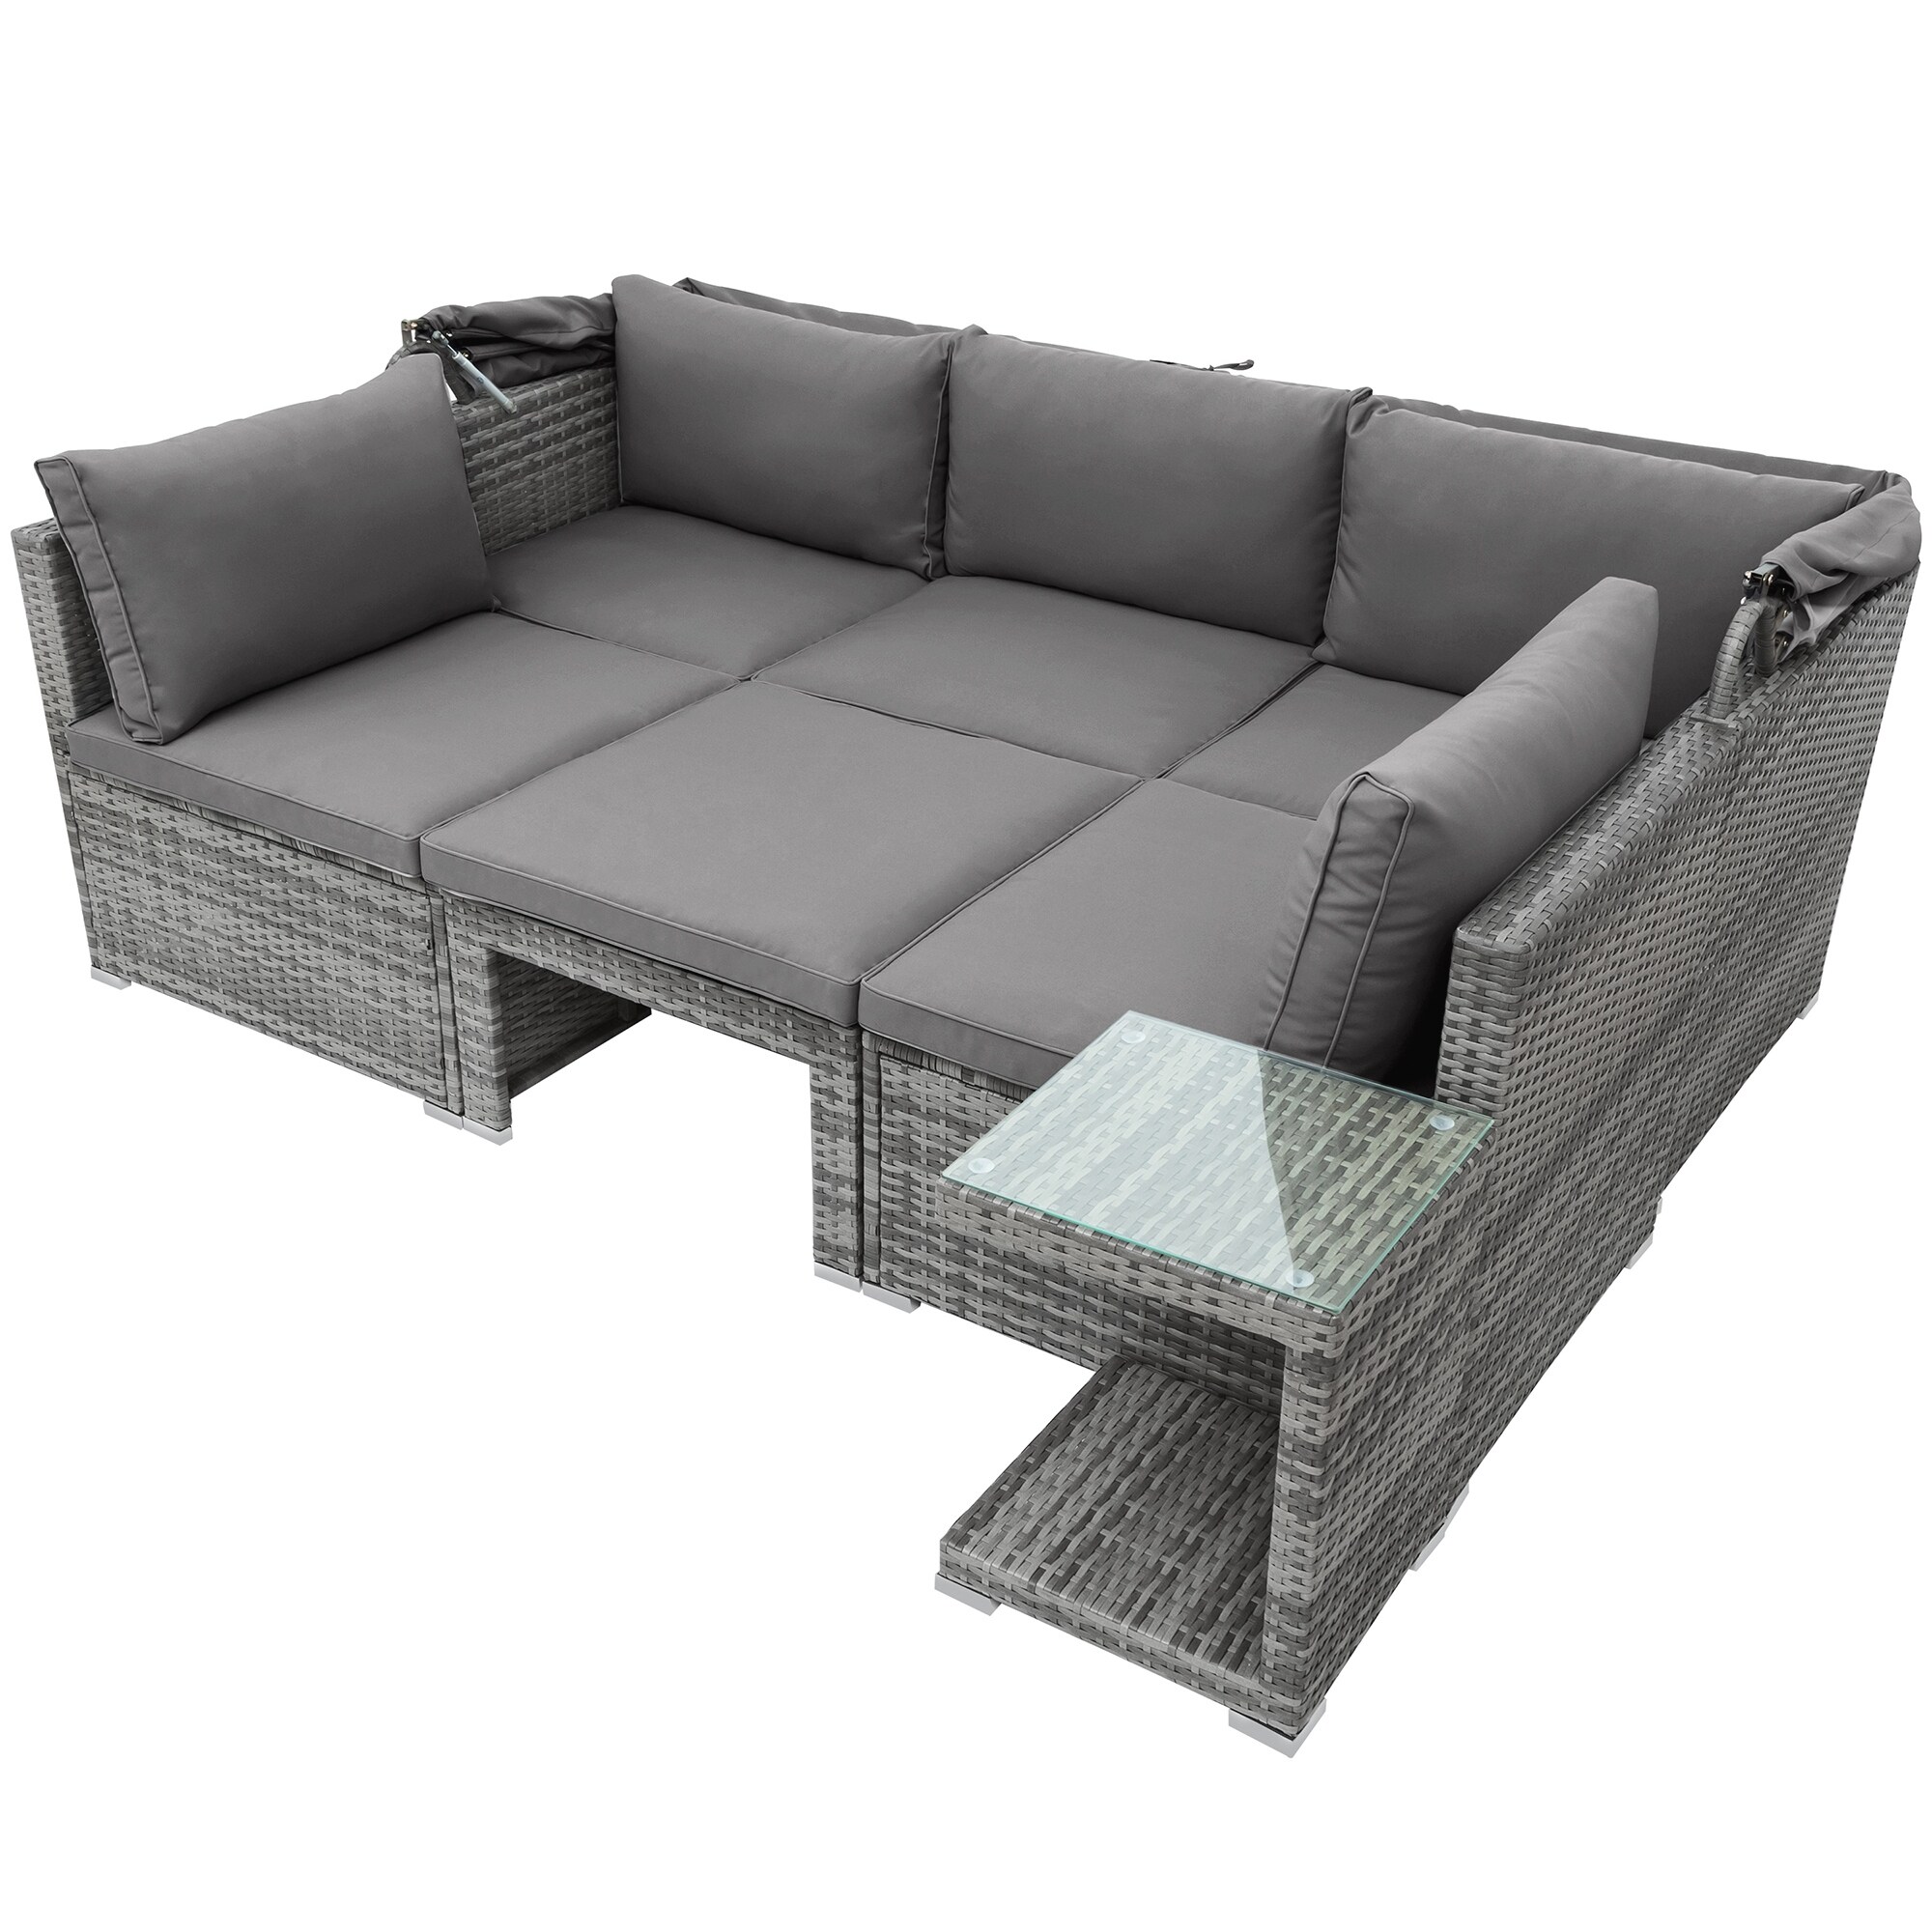 5 Pieces Outdoor Sectional Patio Rattan Sofa Set Rattan Daybed